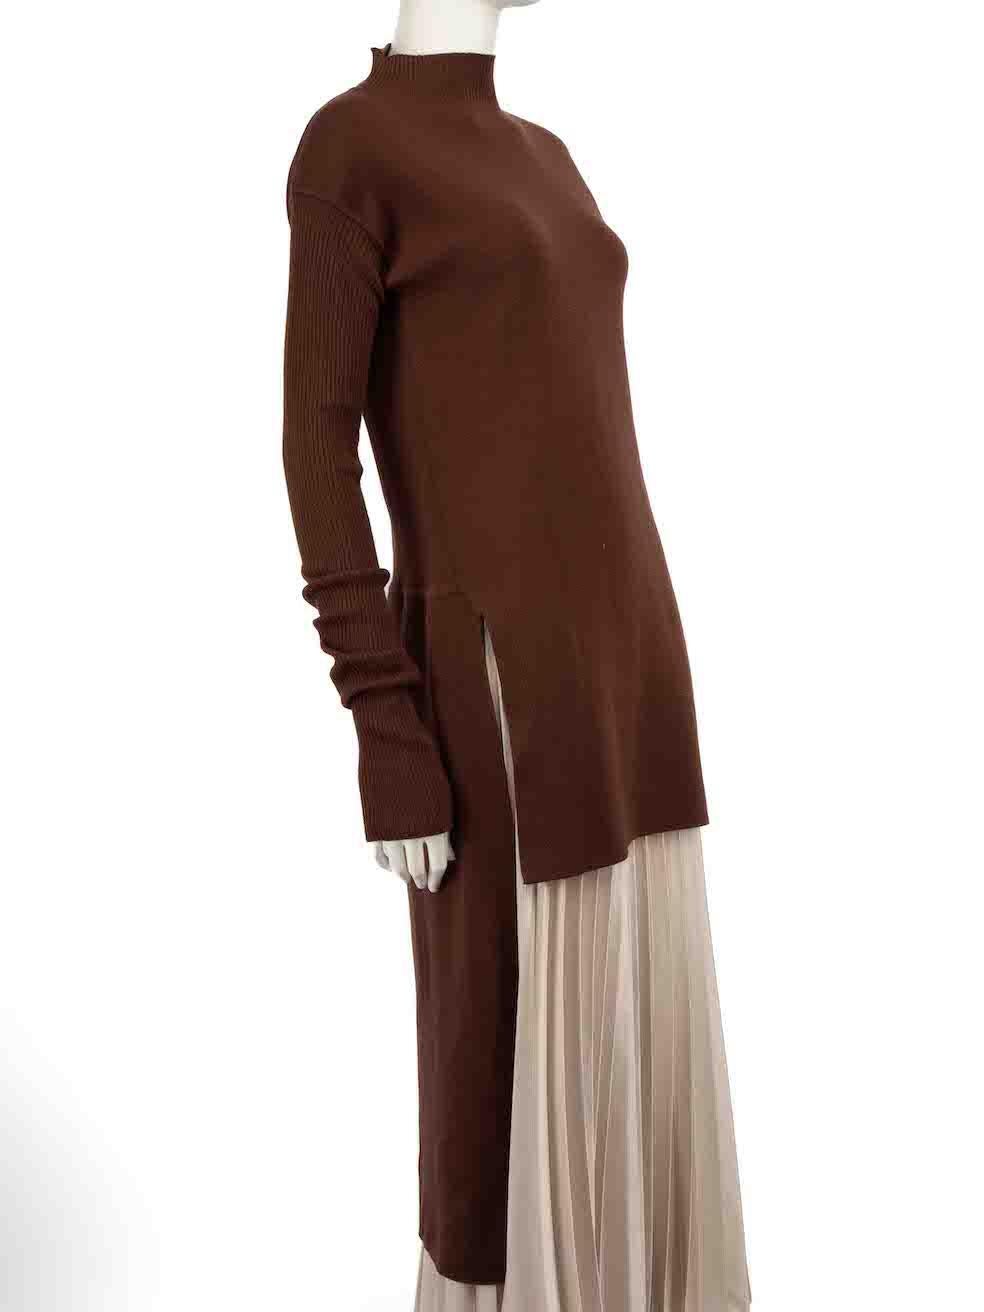 CONDITION is Very good. Hardly any visible wear to dress is evident on this used Rick Owens designer resale item.
 
 
 
 Details
 
 
 F/W 2014
 
 Brown
 
 Wool
 
 Long sleeves top
 
 Knitted and stretchy
 
 High low hemline
 
 Mock neckline
 
 Slits